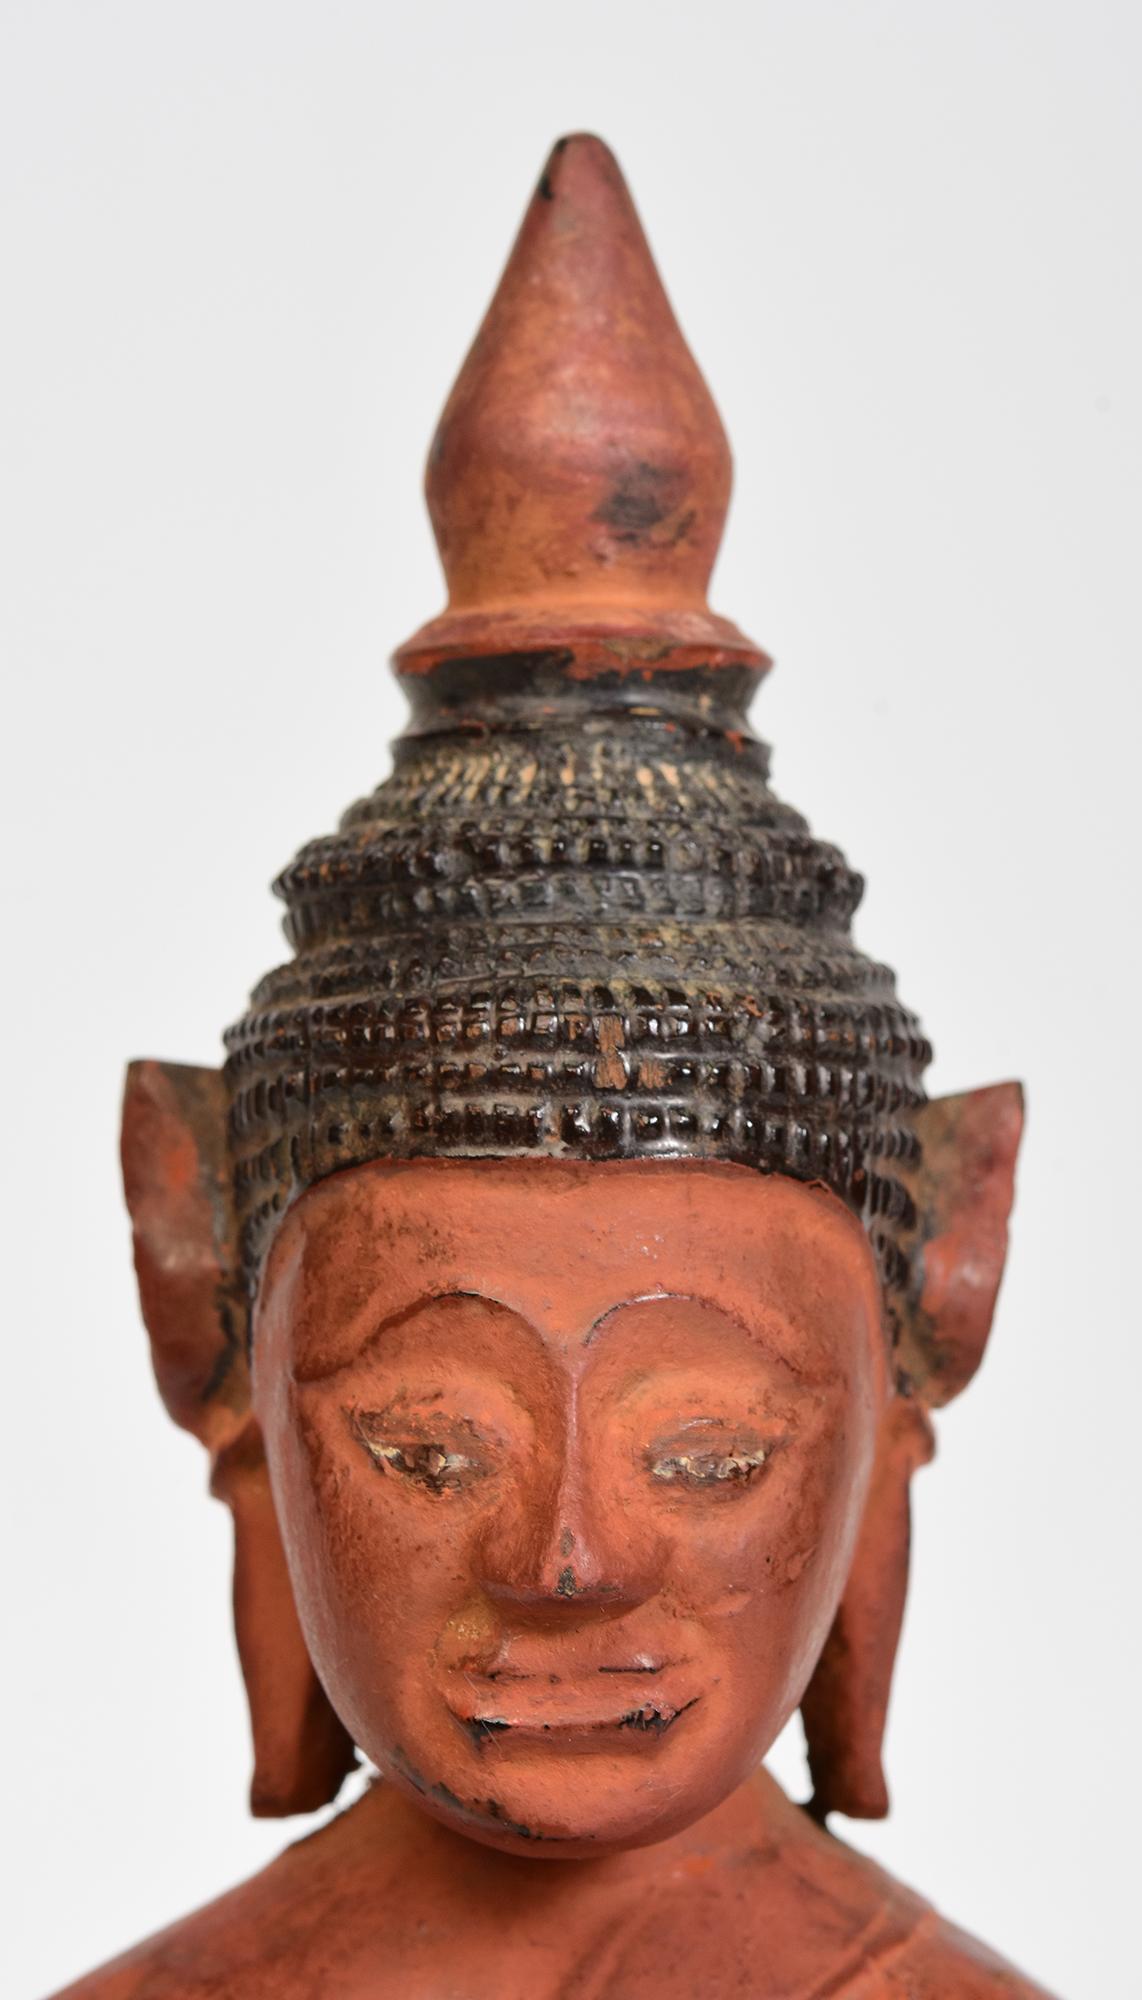 Khmer wooden Buddha sitting in Mara Vijaya (calling the earth to witness) posture on a base.

Age: Cambodia, 18th Century
Size: Height 25.2 C.M. / Width 9 C.M. / Depth 7.7 C.M.
Condition: Nice condition overall (some expected degradation due to its